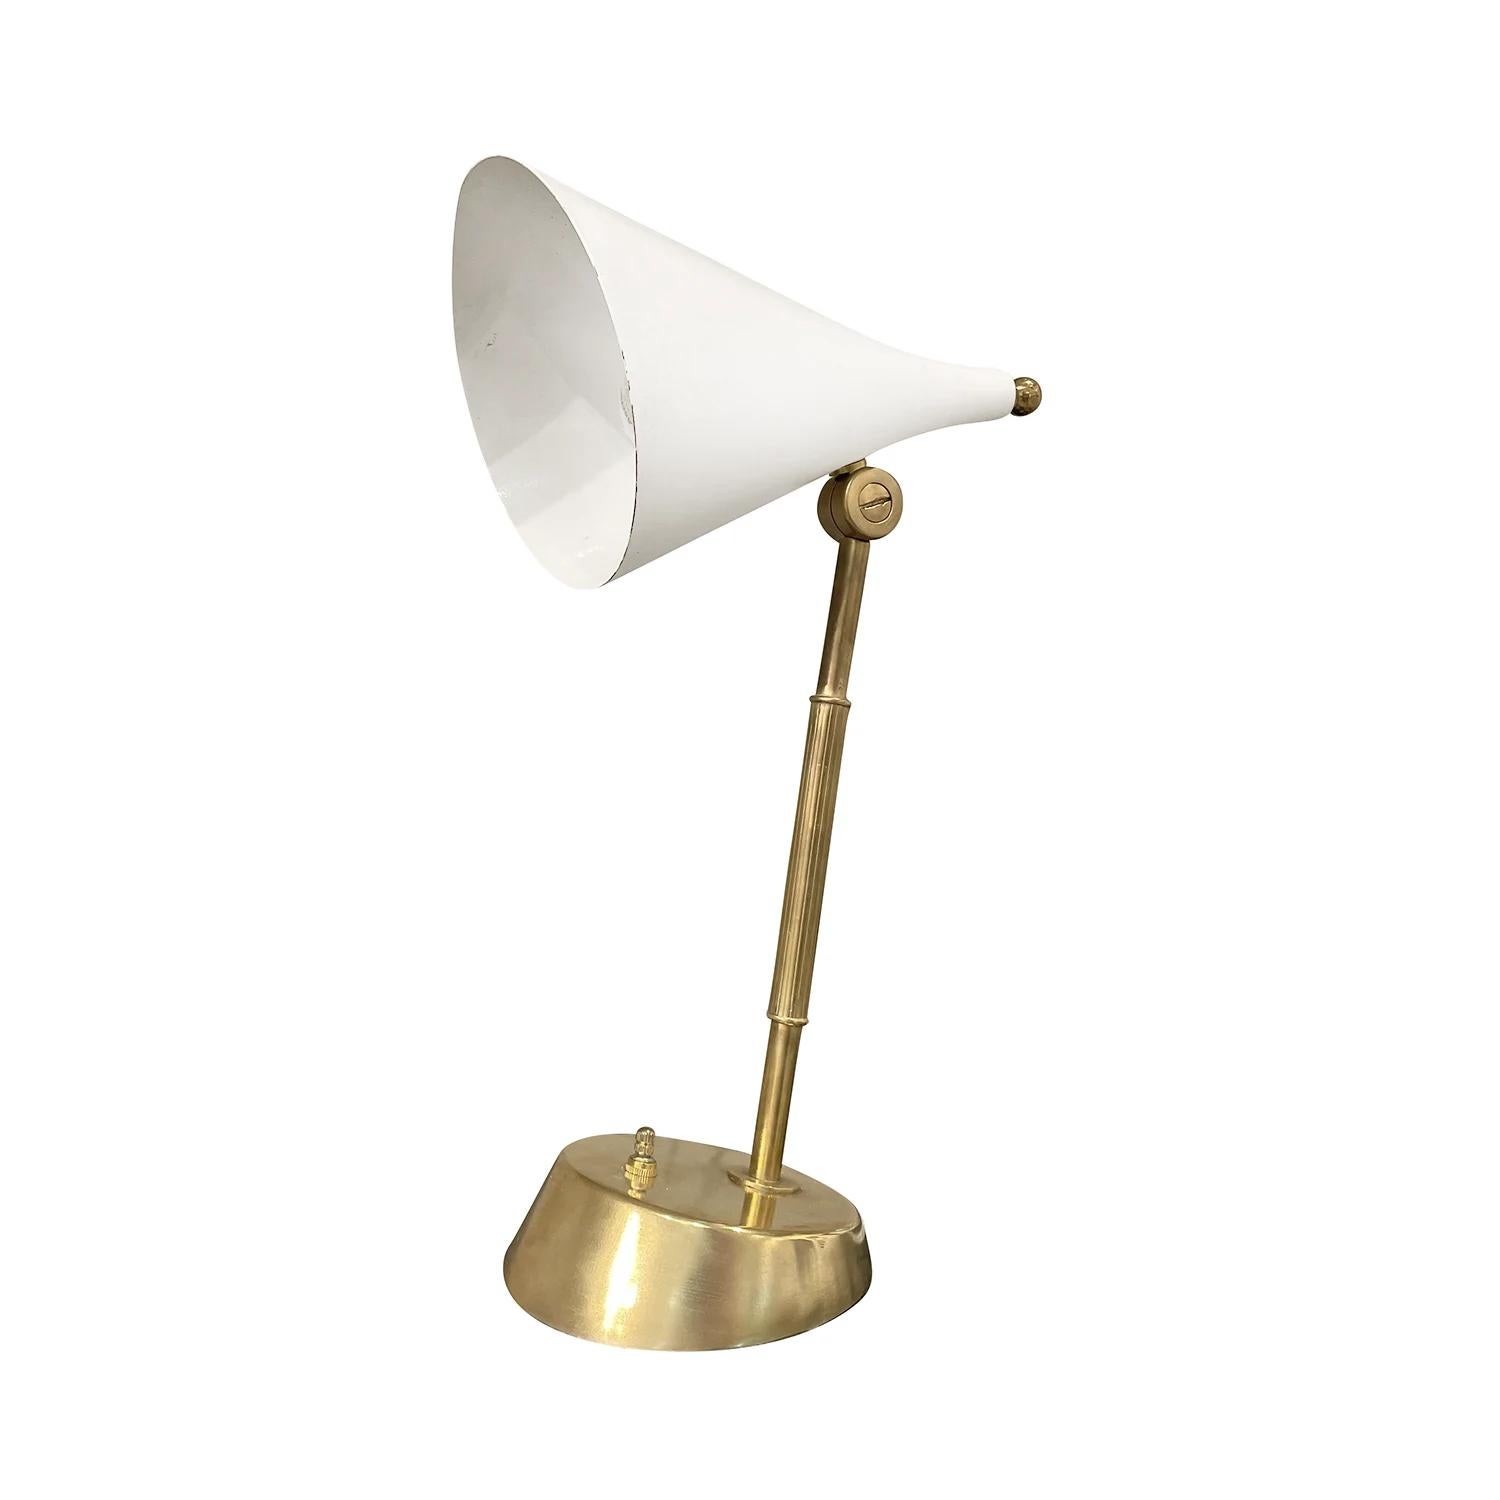 A vintage Mid-Century Modern Italian desk lamp made of hand crafted metal and polished brass, in good condition. The table light is composed with a white conical mount lacquered aluminum shade, supported by a curved brass arm, standing on an